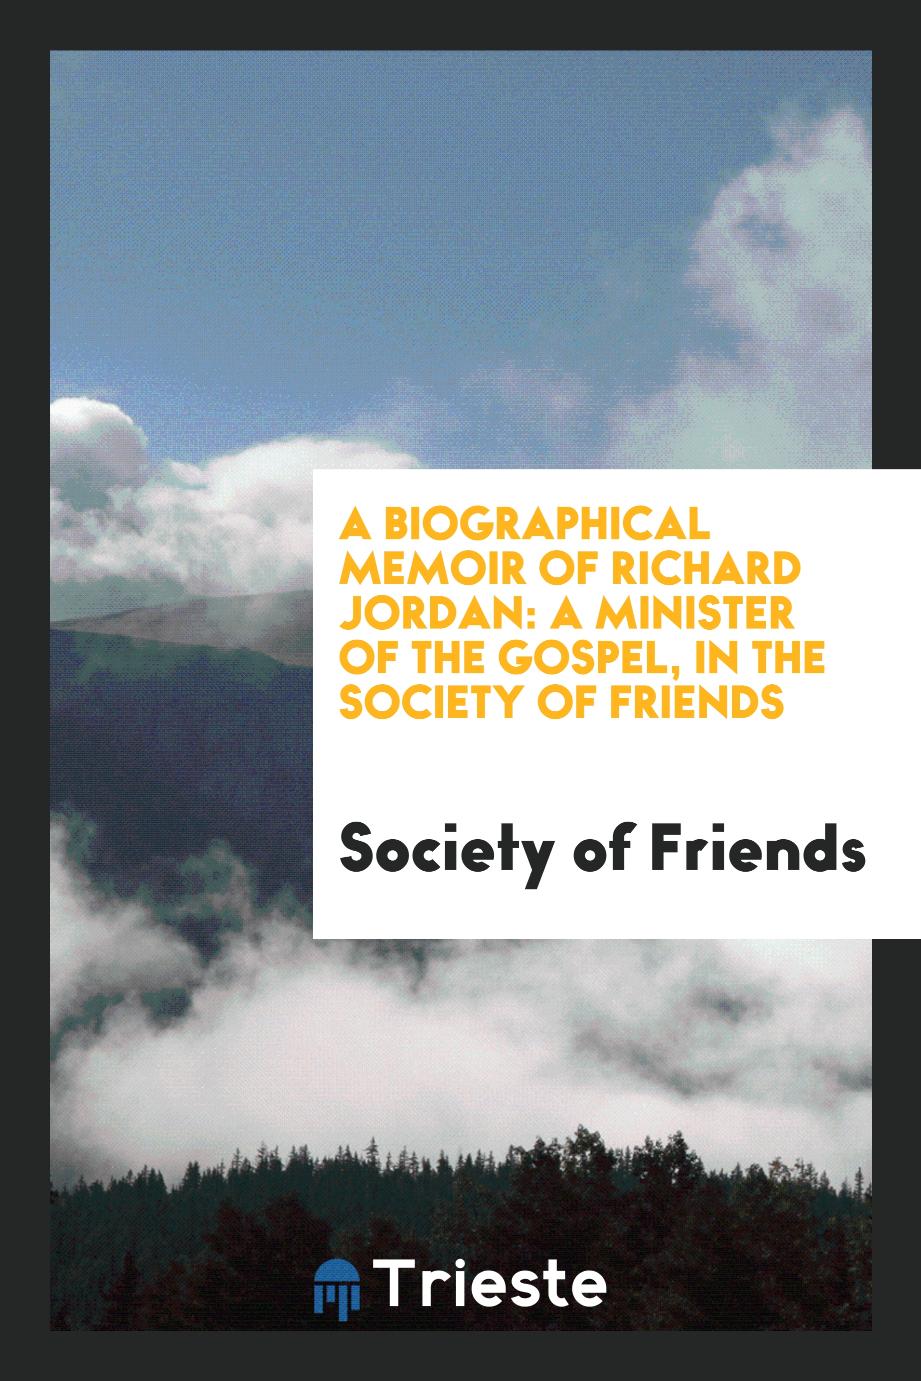 A Biographical Memoir of Richard Jordan: A Minister of the Gospel, in the Society of Friends